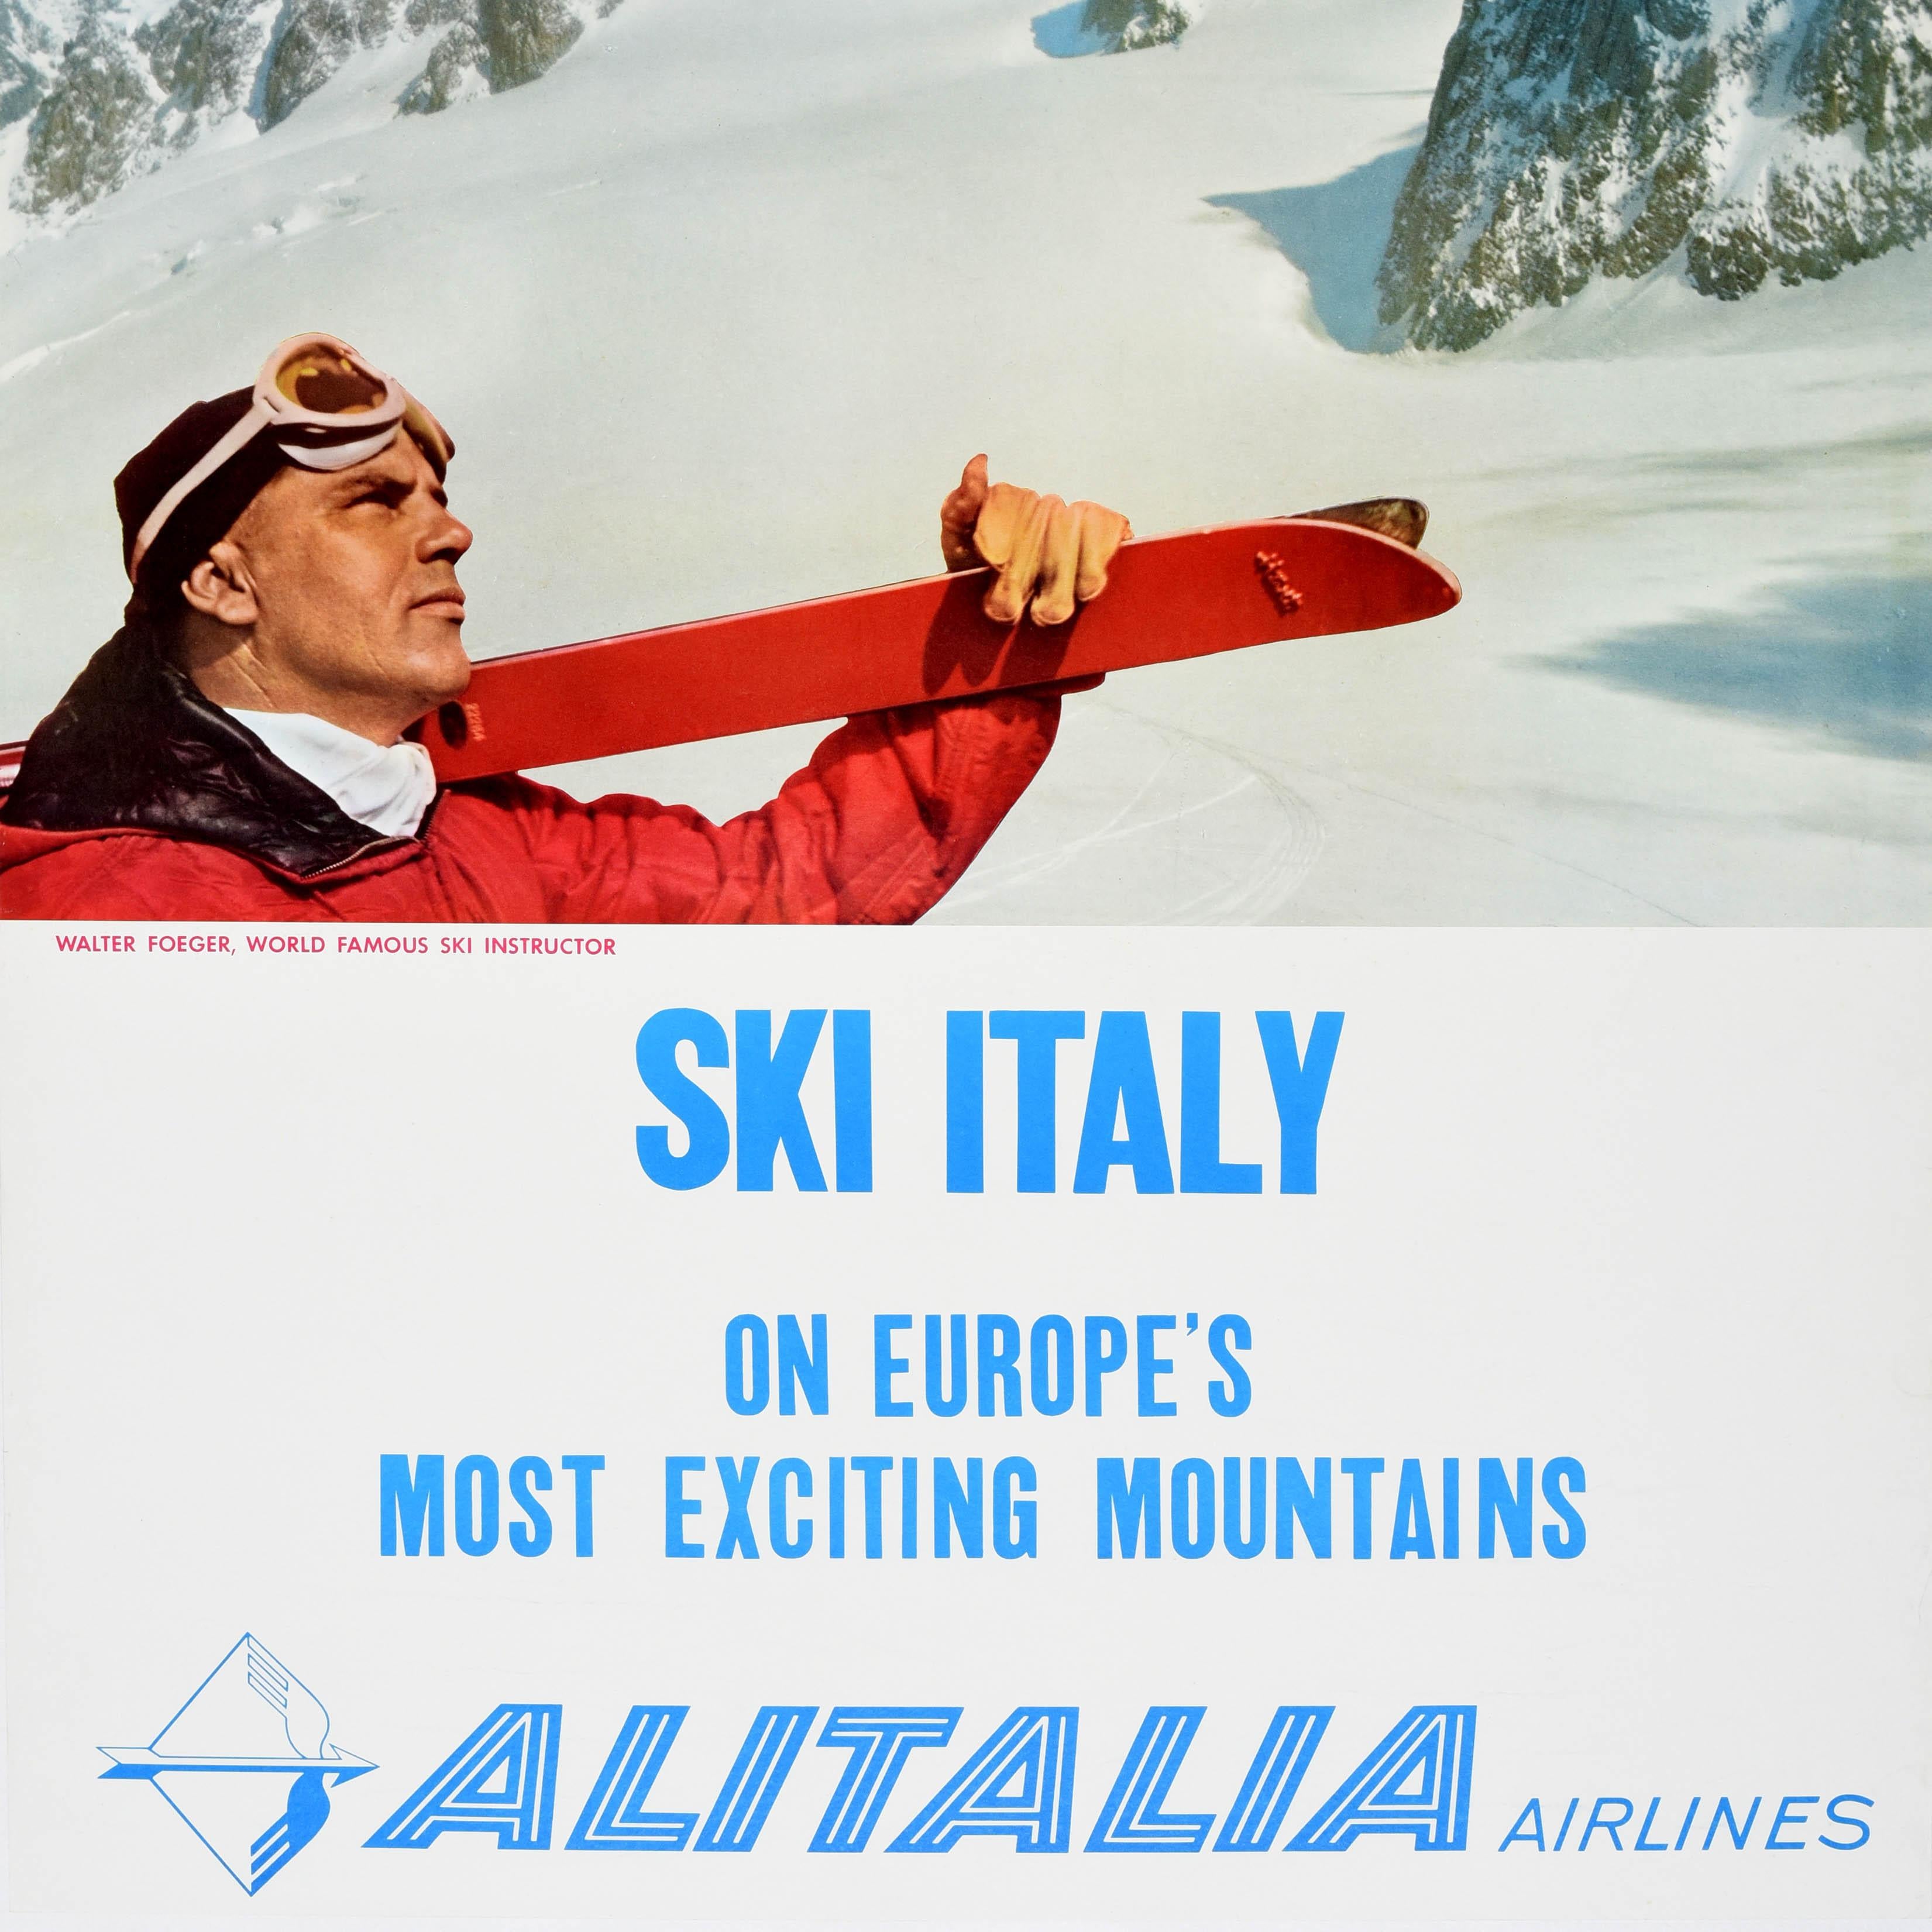 Original vintage skiing travel poster - Ski Italy on Europe's Most Exciting Mountains Alitalia Airlines - featuring a skier with goggles on his head and holding a pair of red skis over his shoulder, looking up at the snowy mountain peaks below a